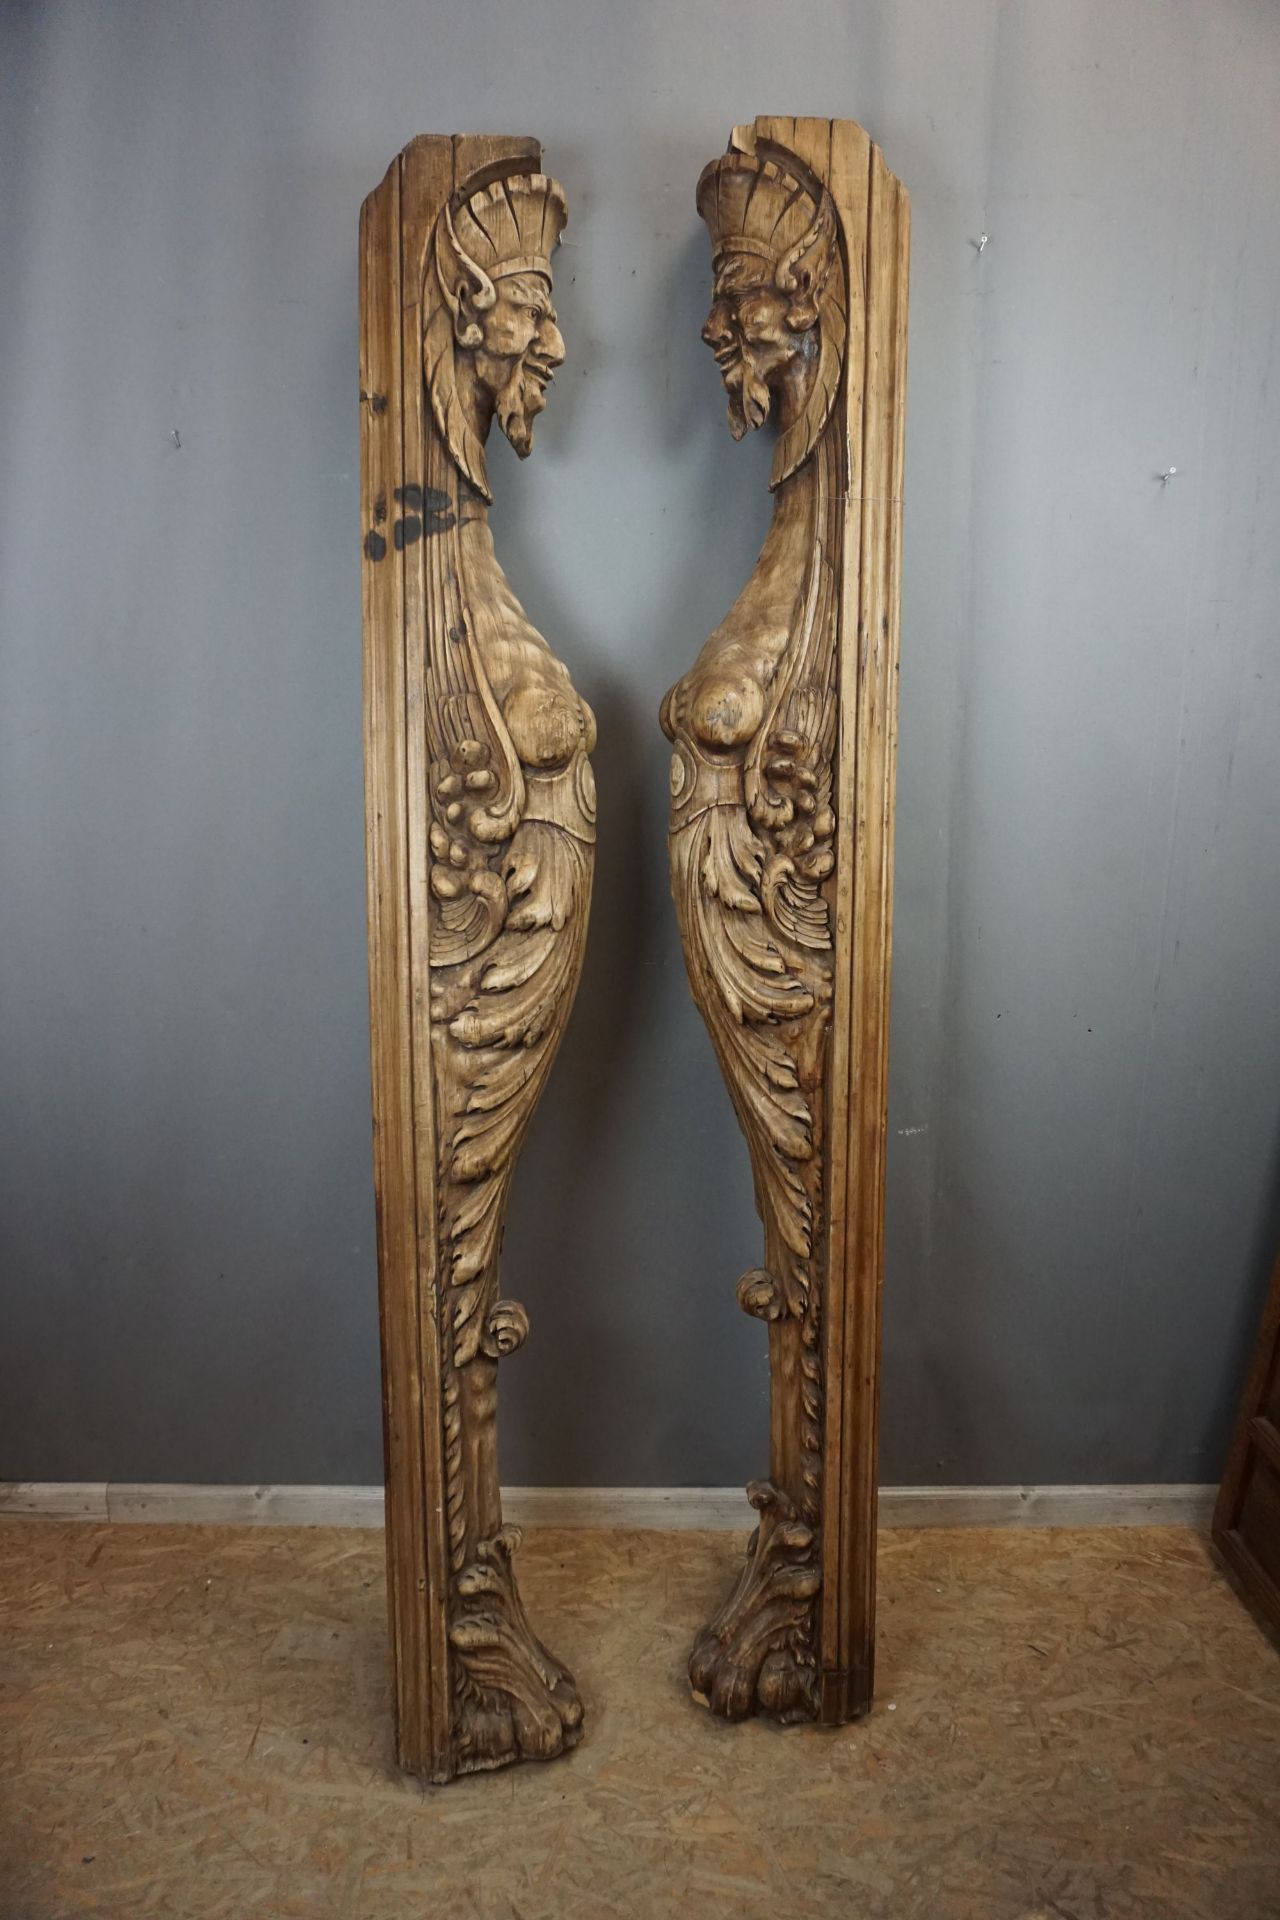 Couple of Kariatides in wood 19th H210x17x18 - Image 2 of 2